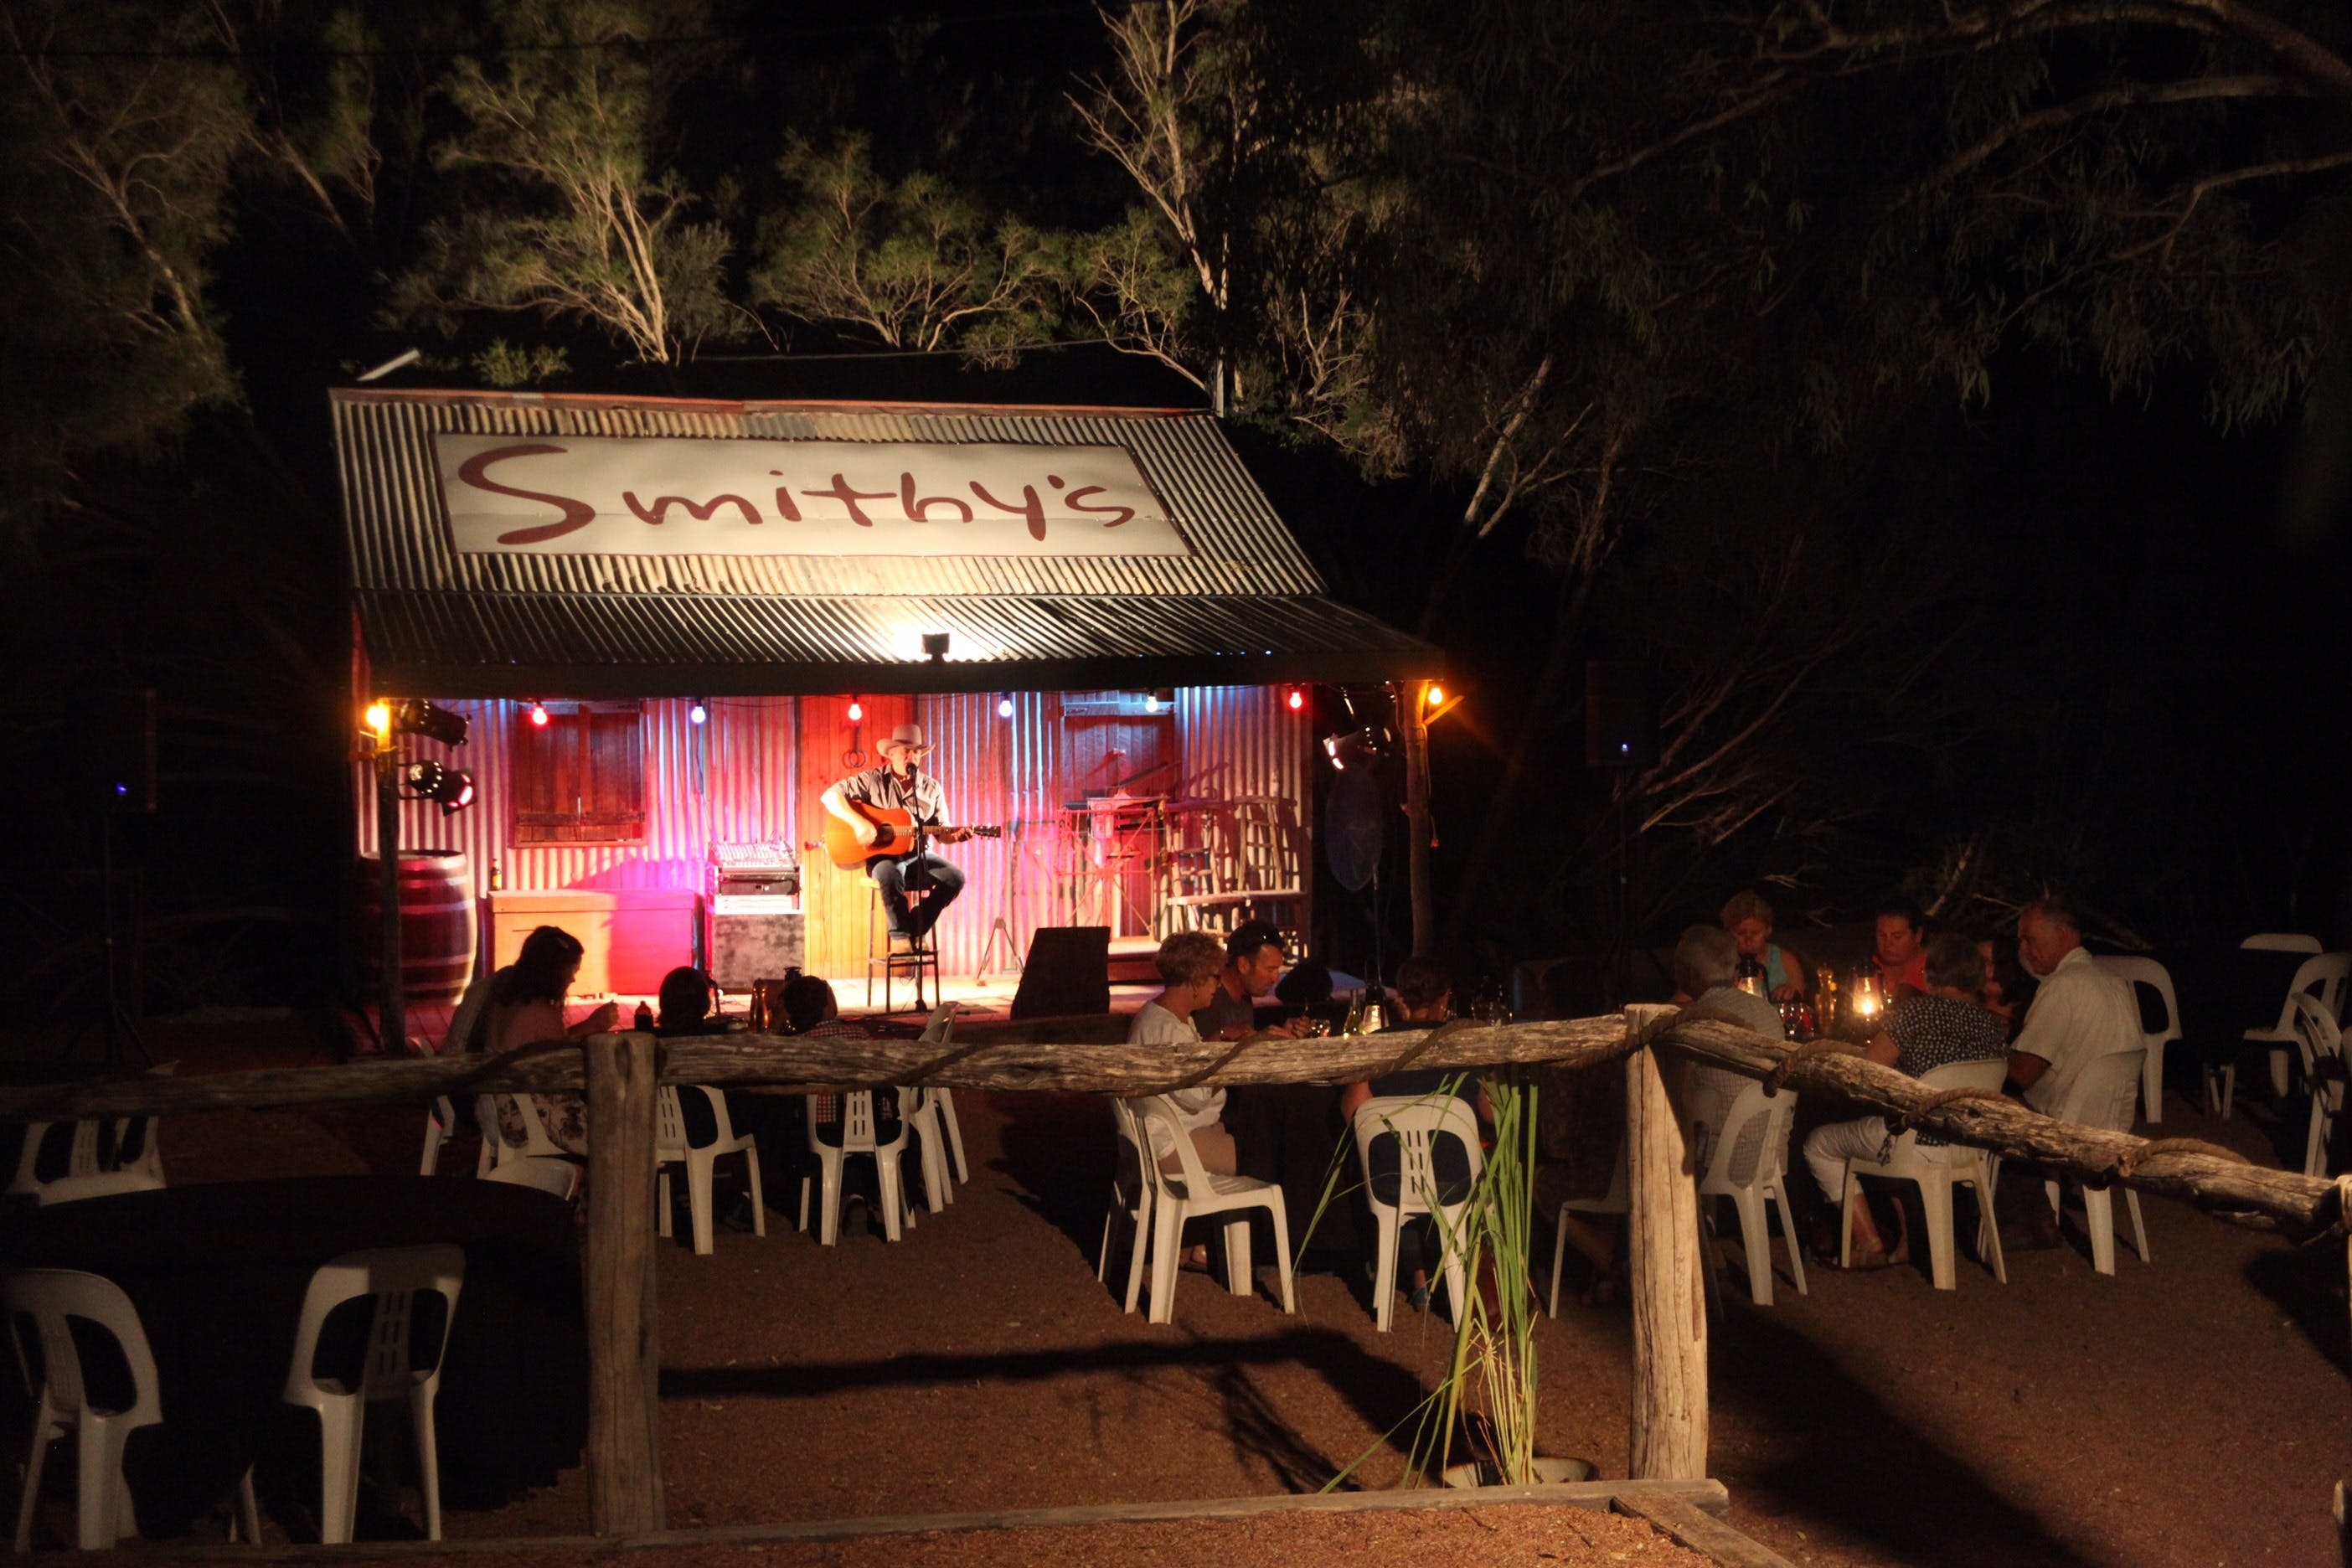 Smithy's Outback Dinner and Show - Attractions